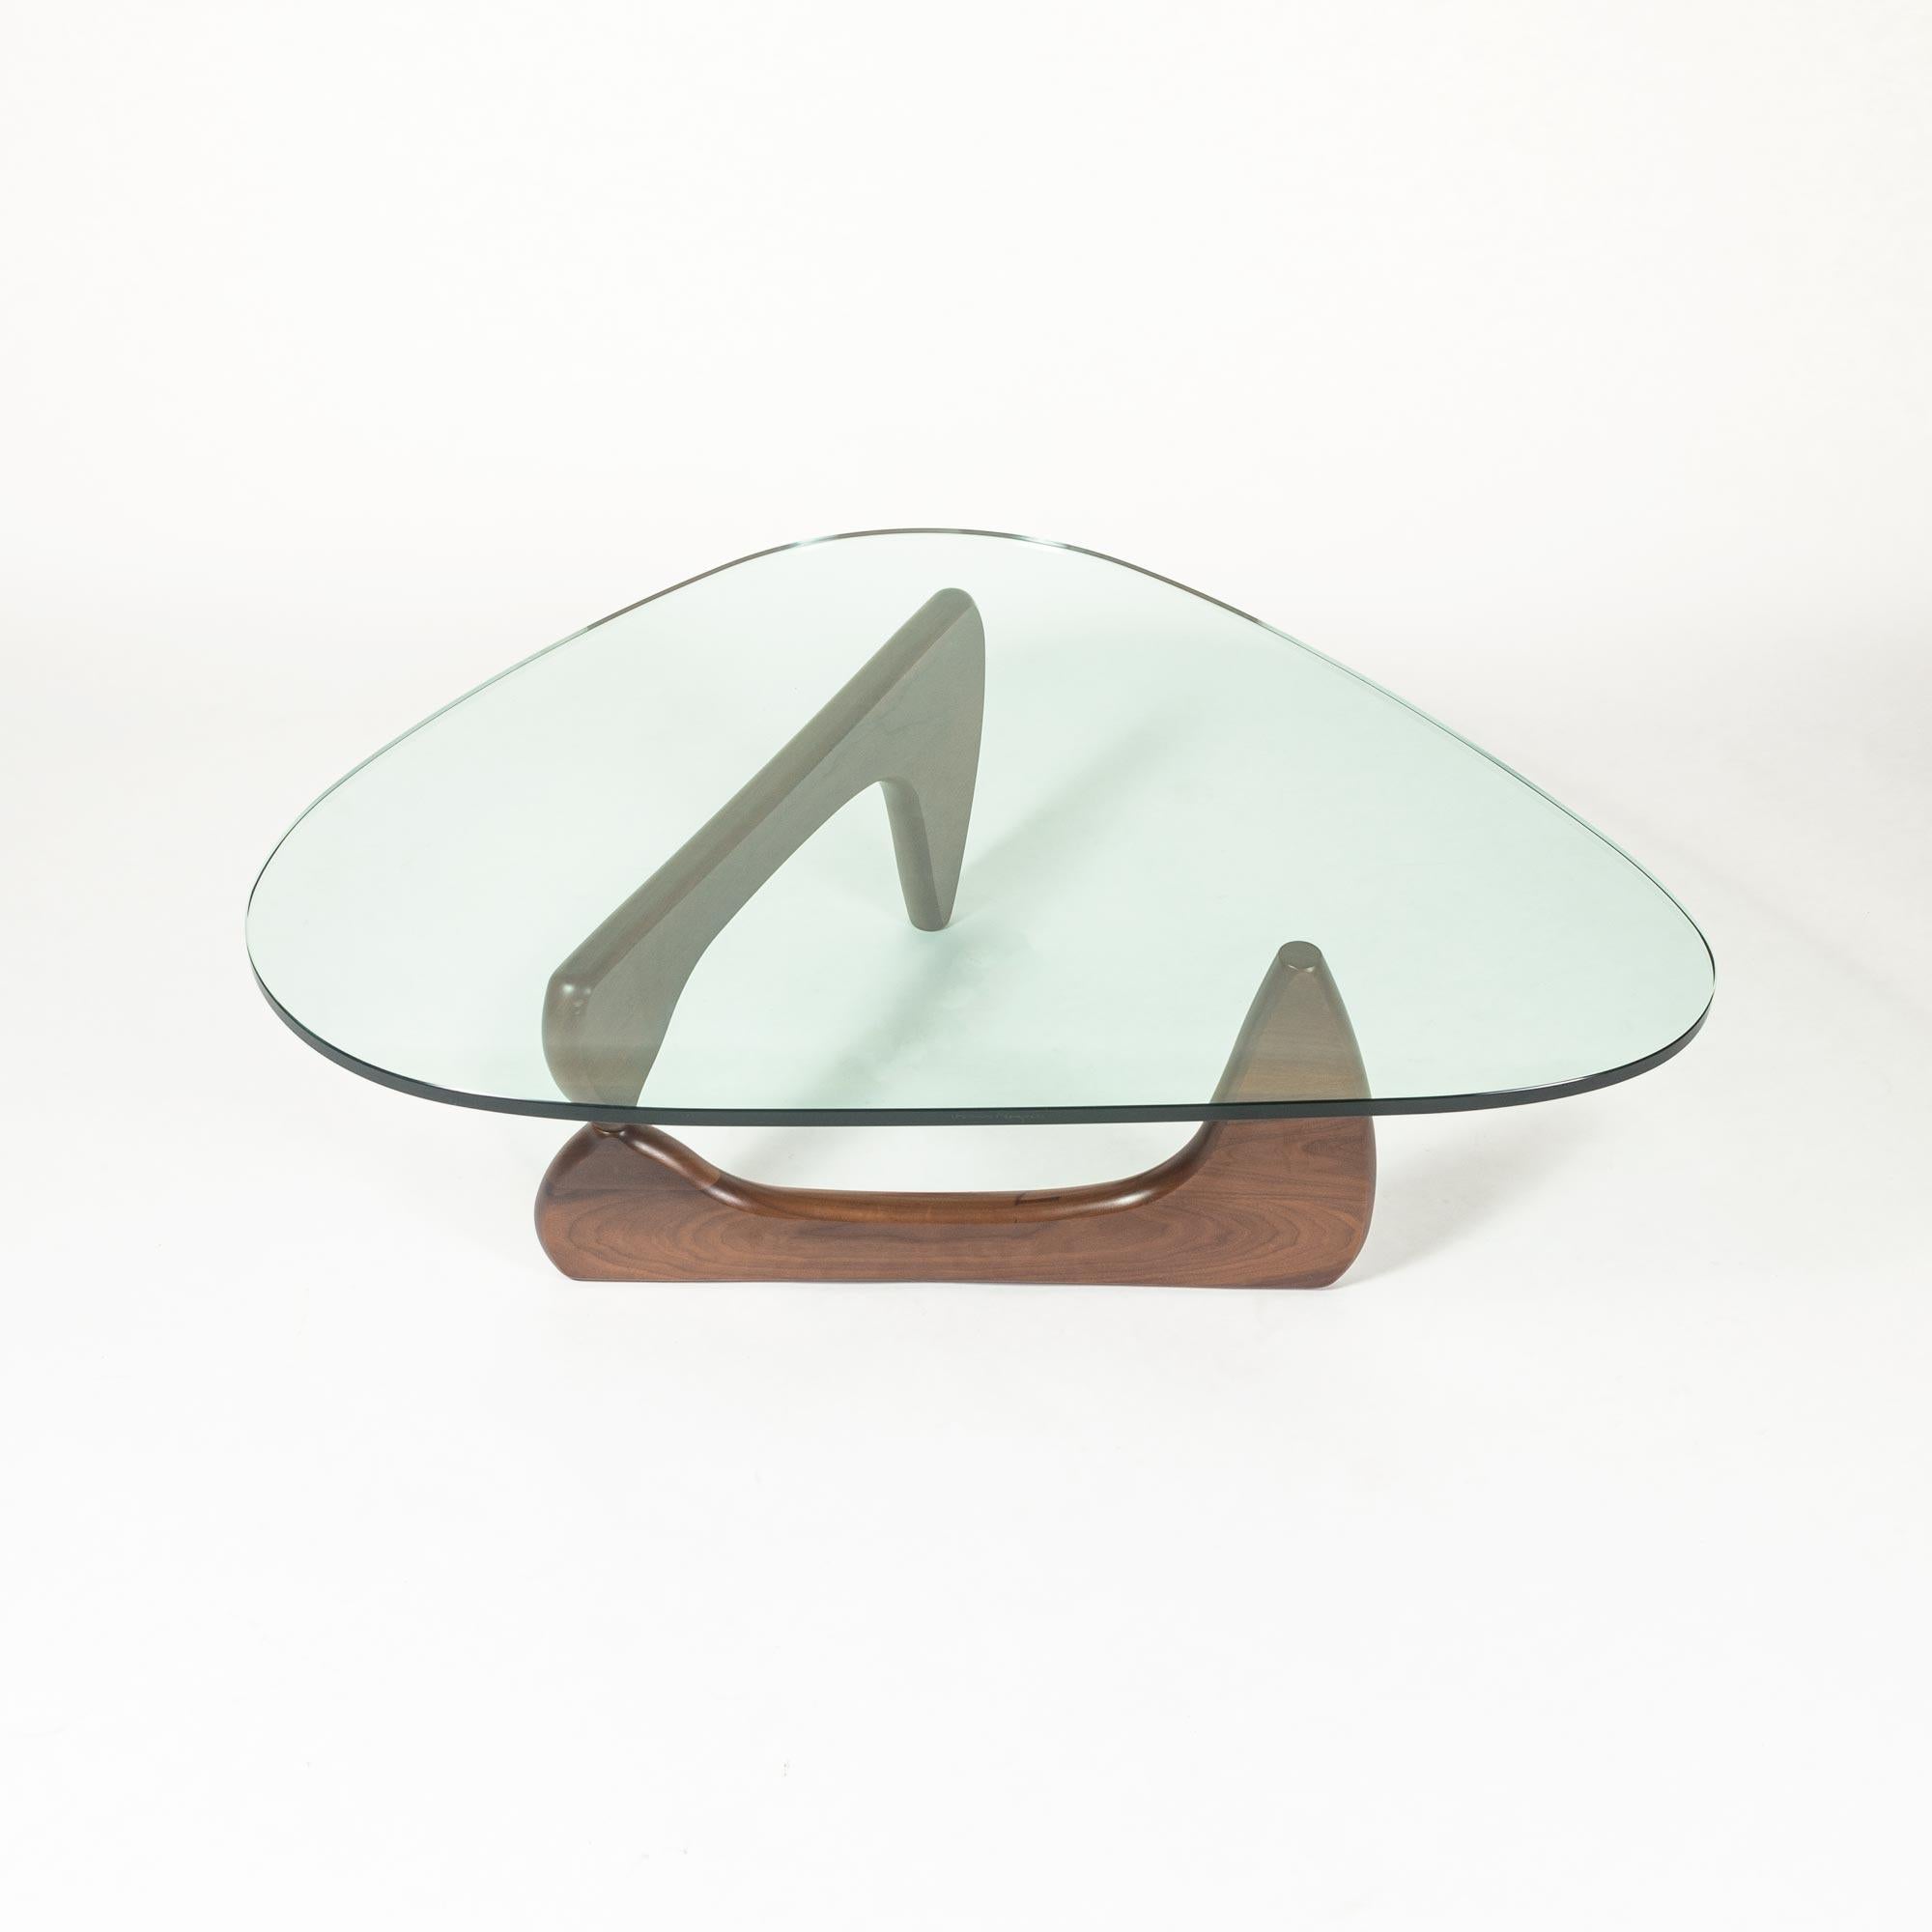 A Classic Mid-Century Modern design by Isamu Noguchi for Herman Miller. Heavy 3/4 inches thick glass sits on top of walnut frame perfectly balance and still. Designer's signature on the edge of the glass, and manufacturer label on the frame remains.